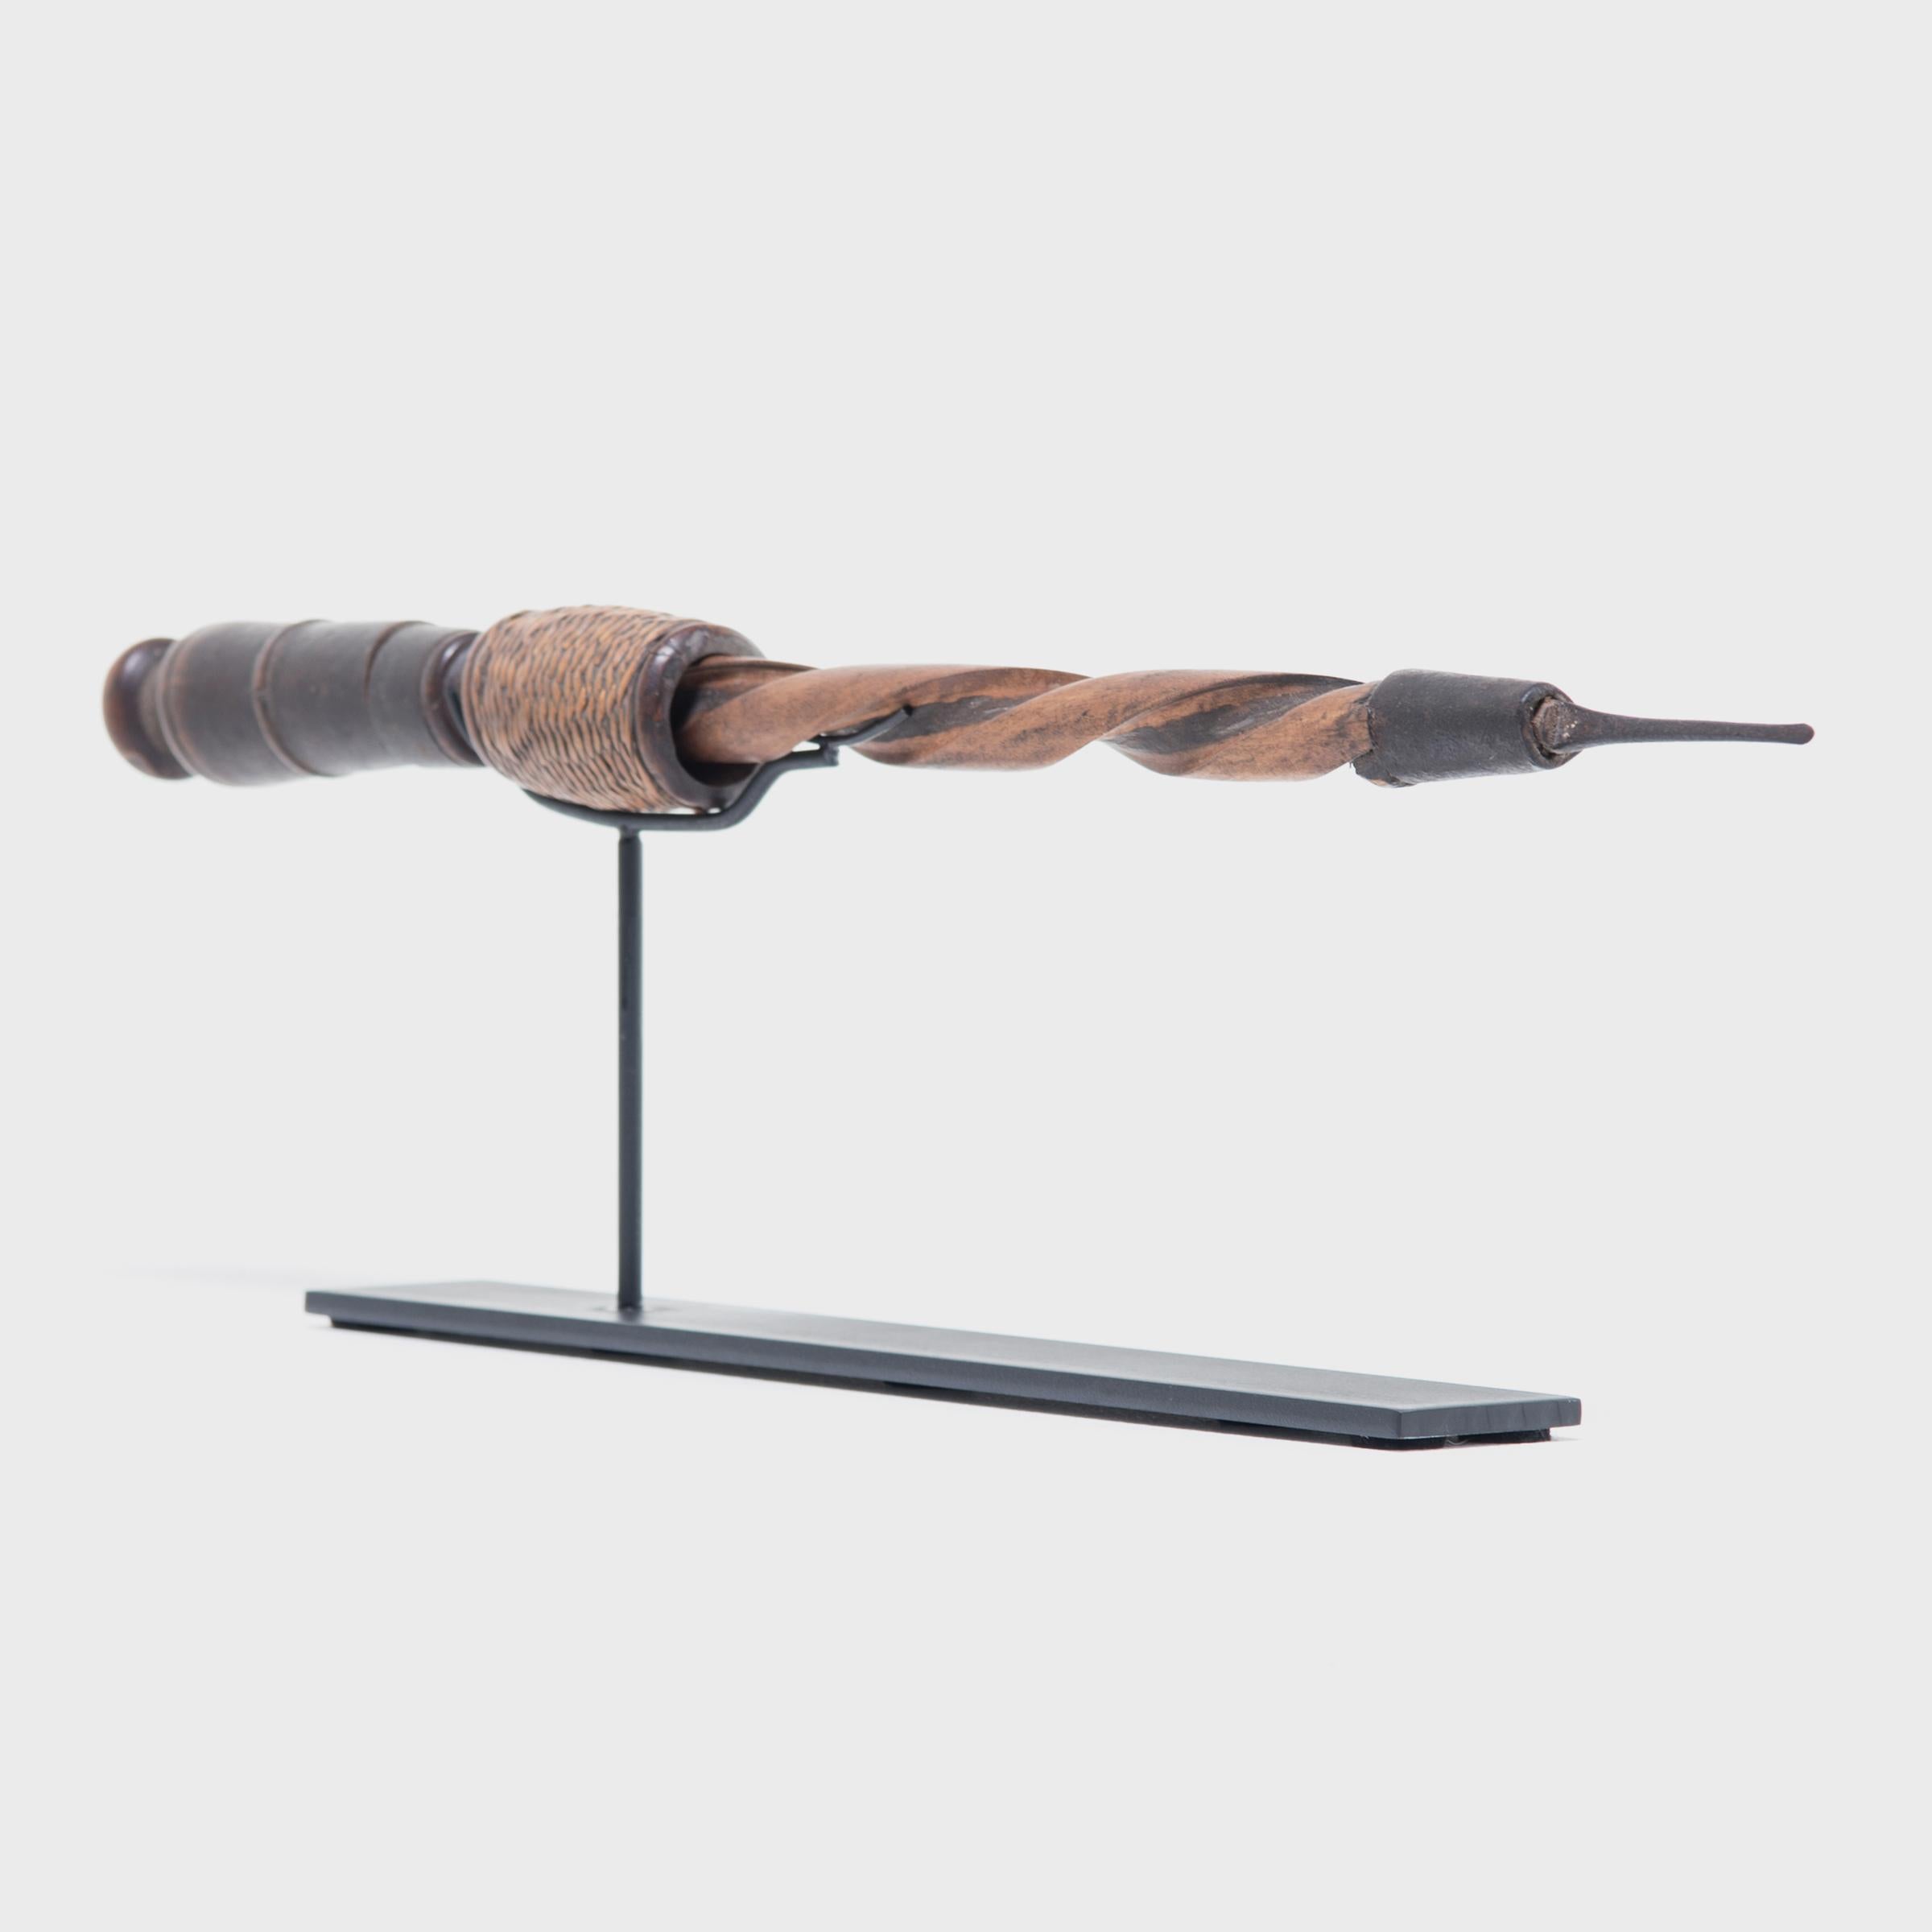 Long ago, an Indonesian artisan living on Lombok, an island well known for its weaving, made his living using this handsome handcrafted drill. The ferrule tip is copper, the tapered handle iron and the shaft carved out of wood with a woven stop. Now